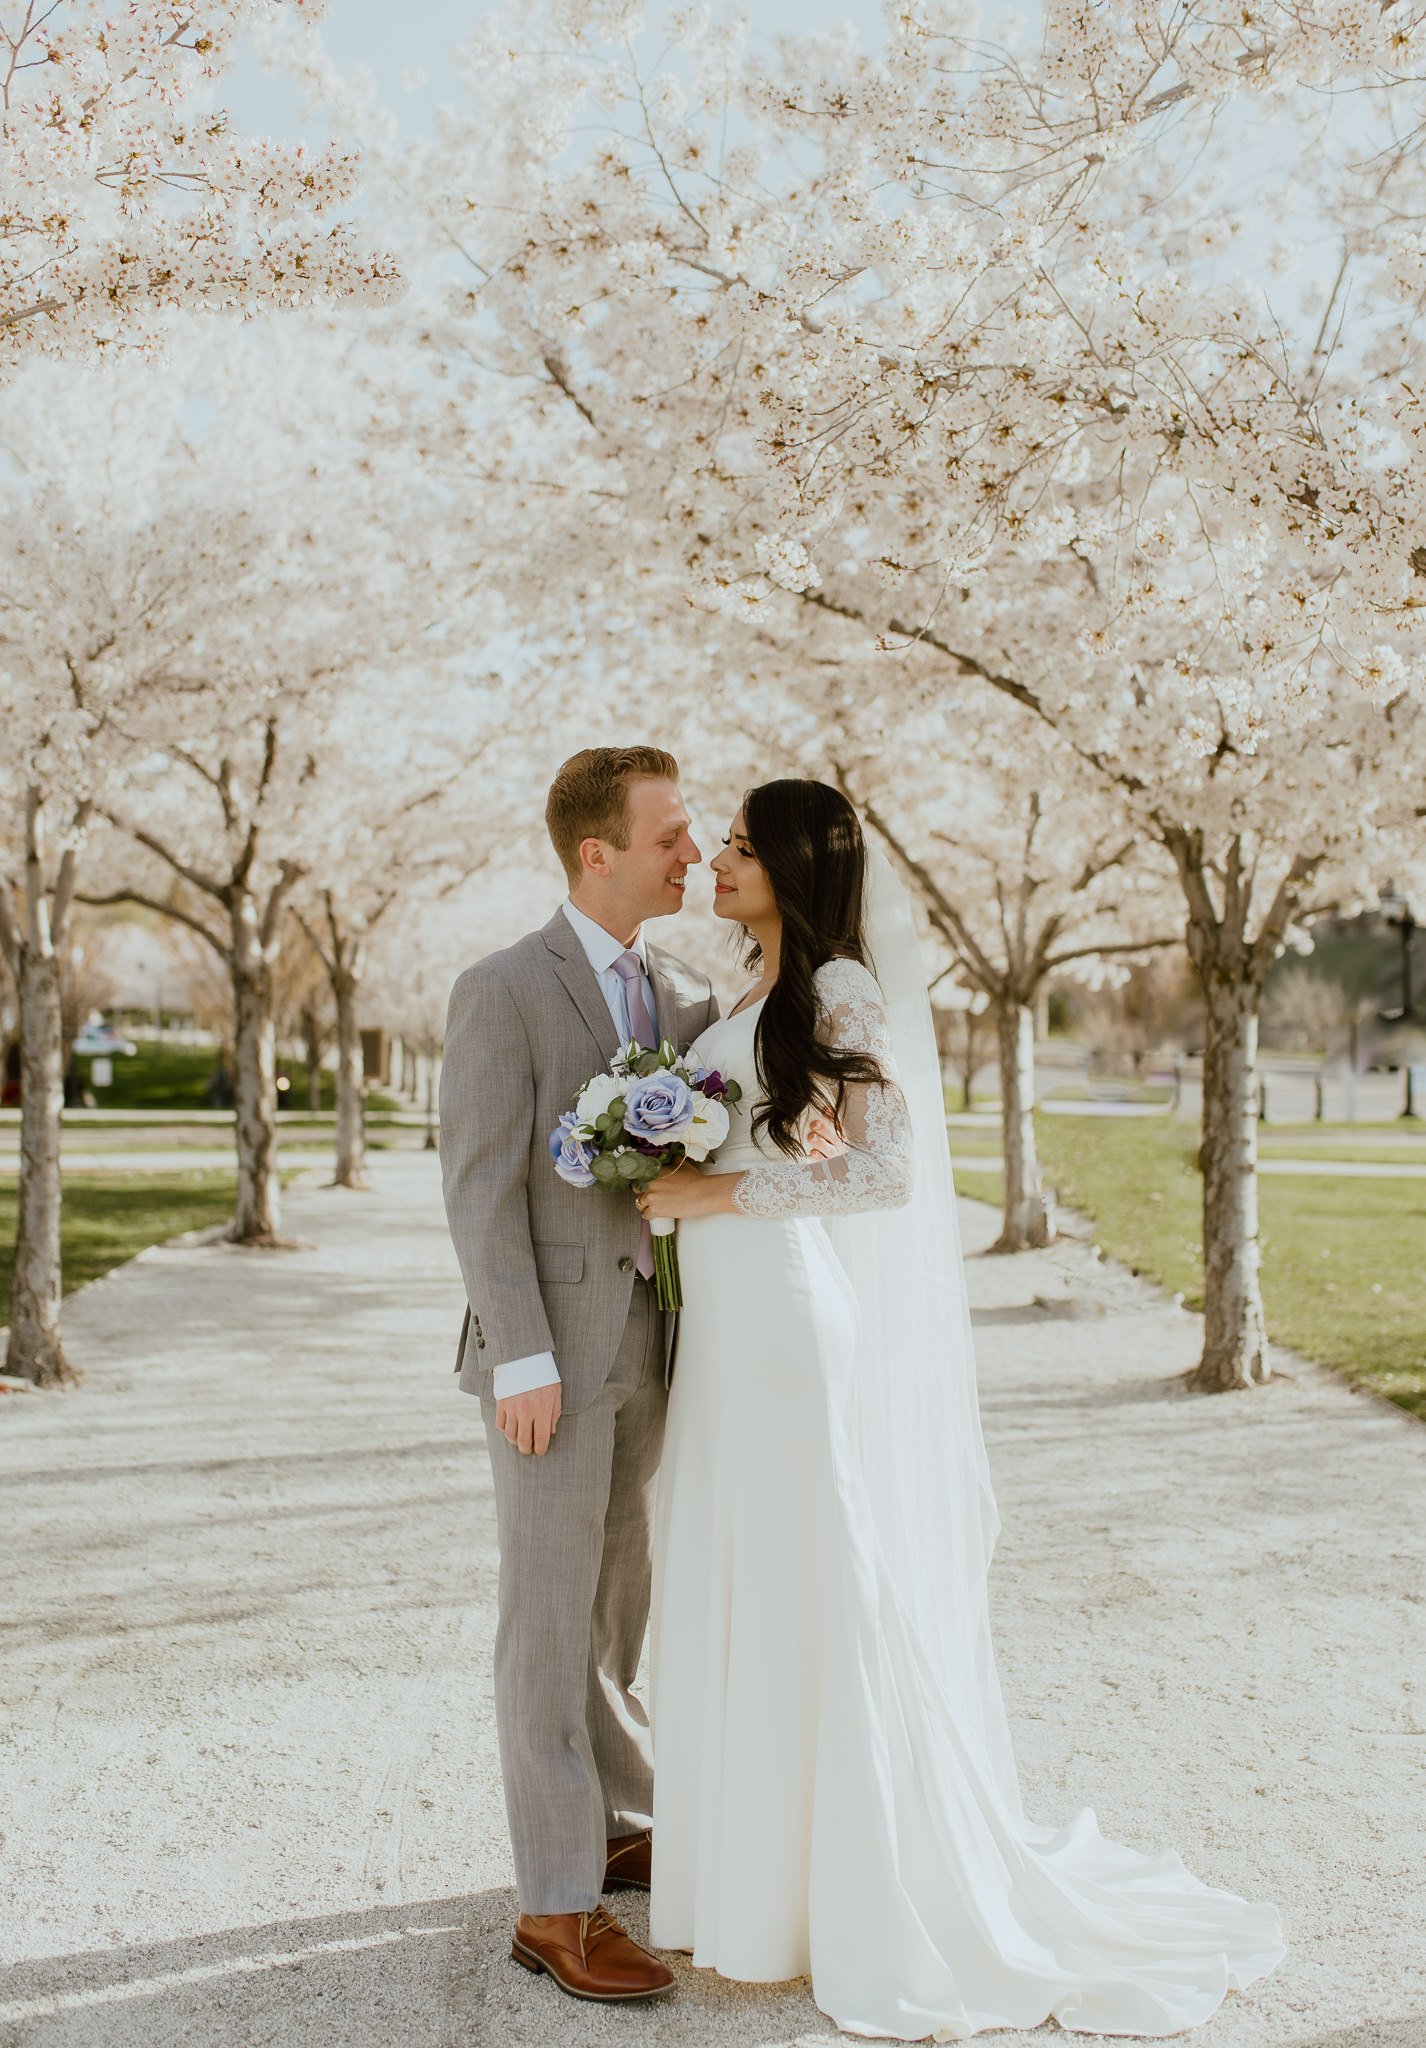 Utah-State-Capitol-Spring-Blossons-Bountiful-LDS-Wedding-Hopesandcheers-photo-3